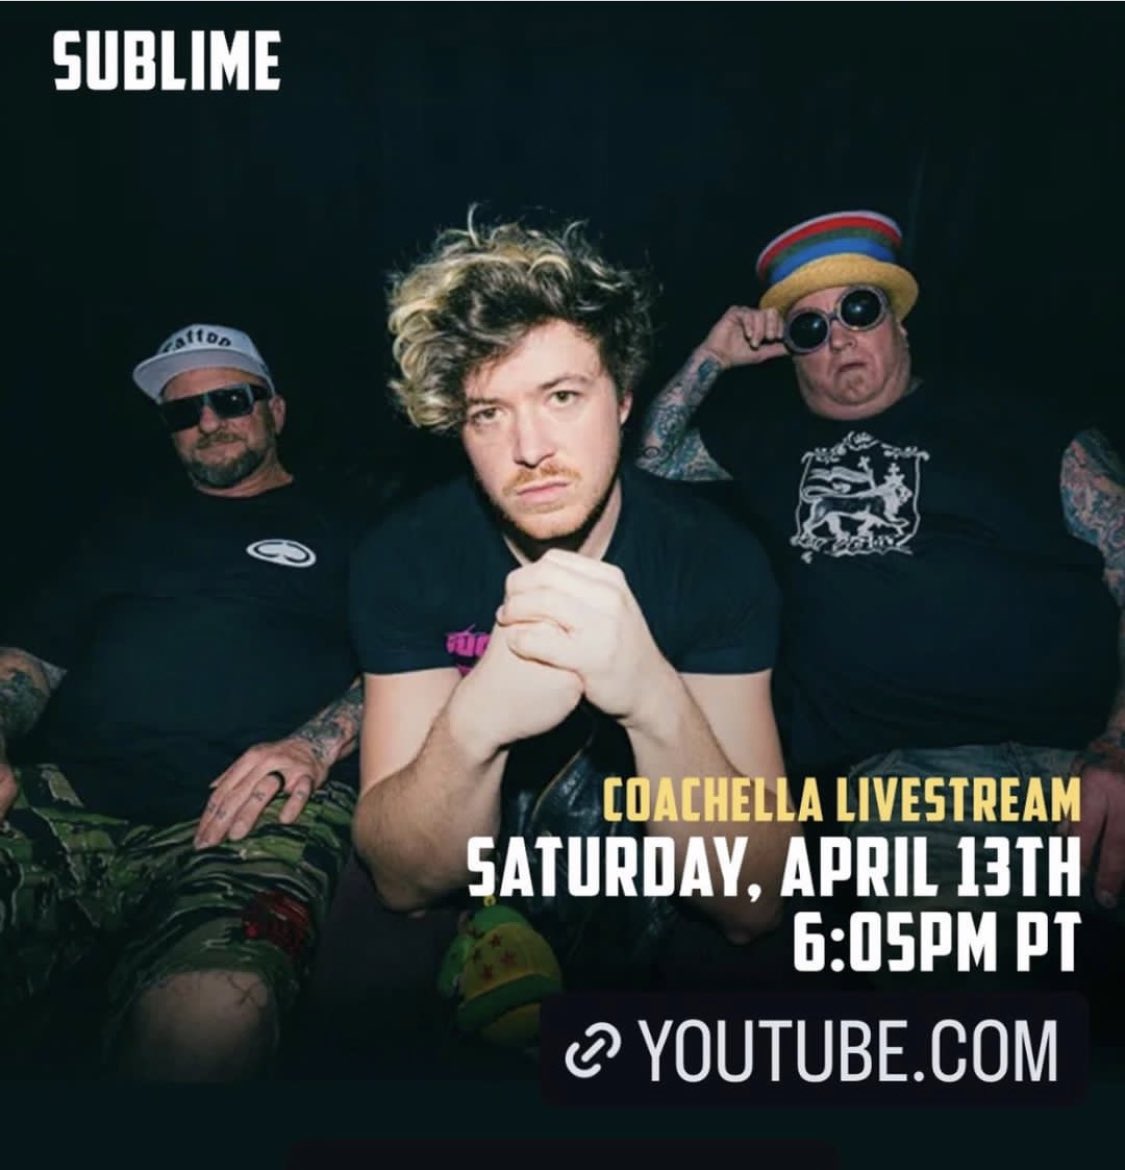 Up next (in #SkaParade alumni acts performing at @coachella ) - @sublime at 6:45pm Pacific. Watch it via: youtube.com/live/dYTuZMRFh…